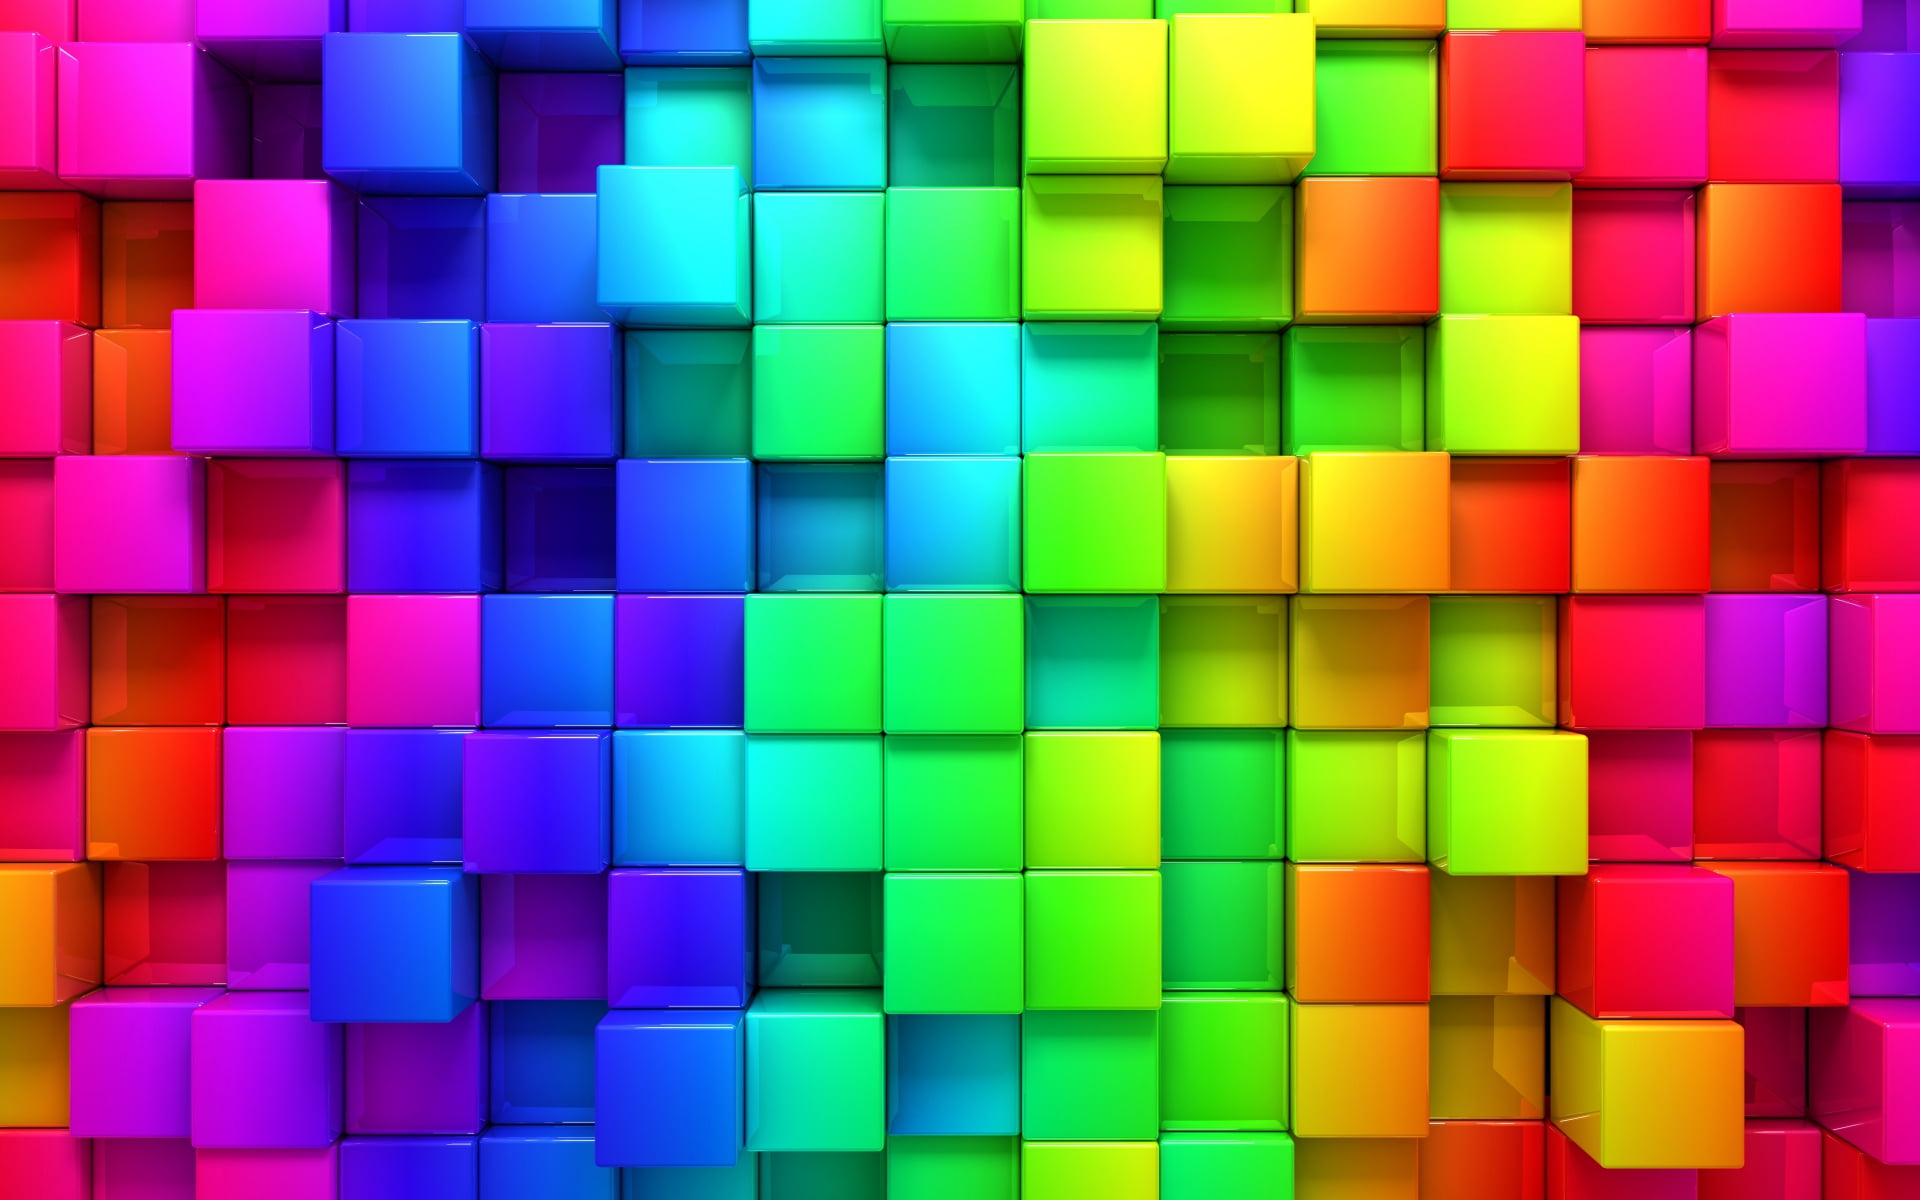 3840x2160 resolution | blue, green, yellow, pink and red cubes ...